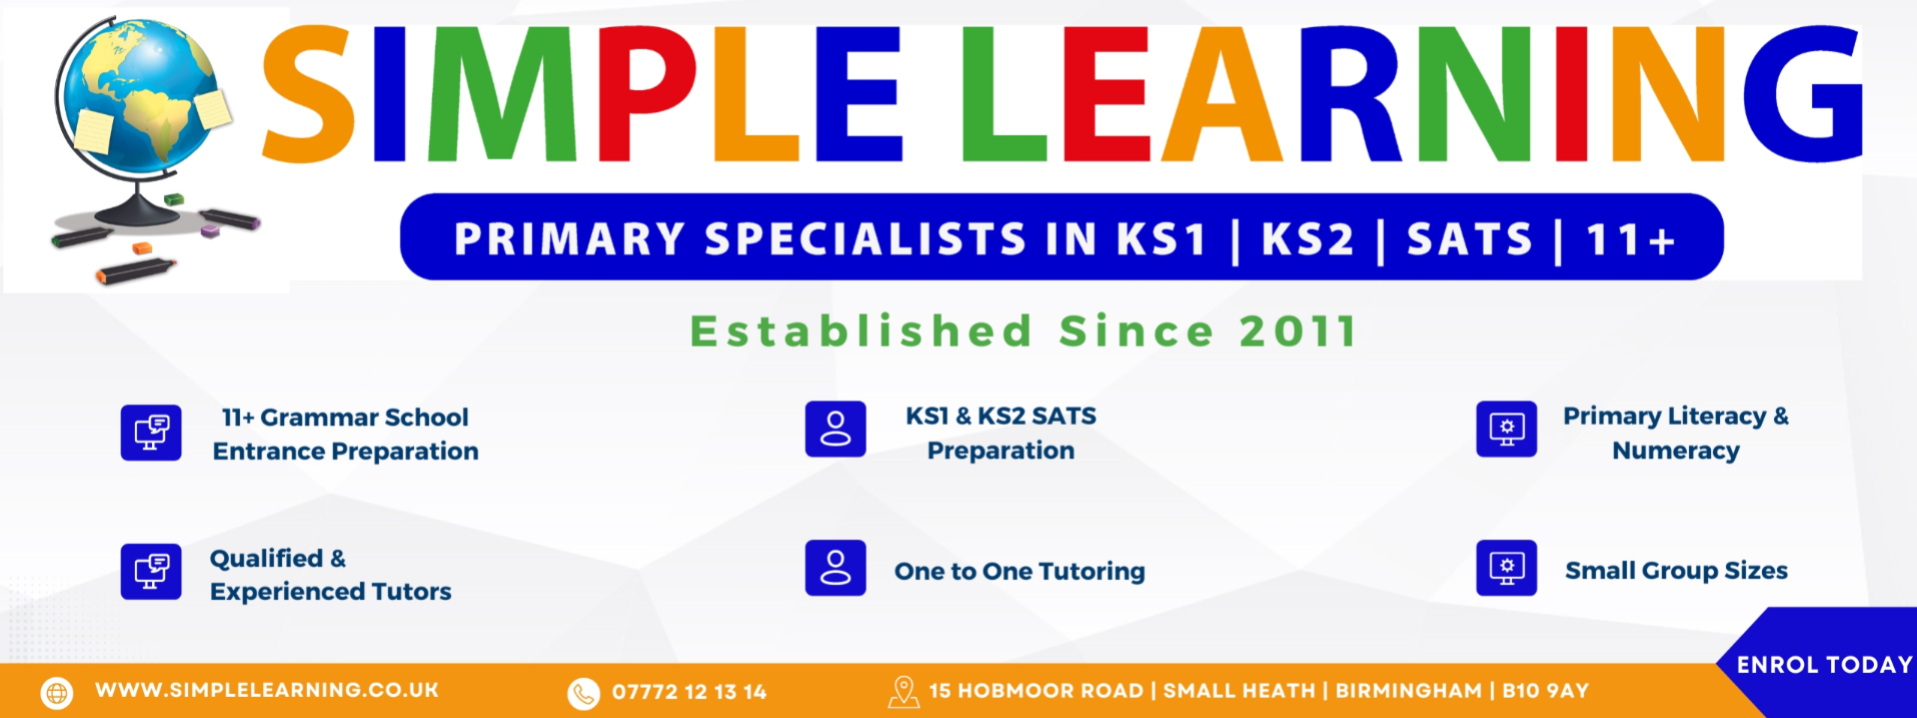 Simple Learning Tuition - Primary Specialists In KS1, KS2, SATS & 11+